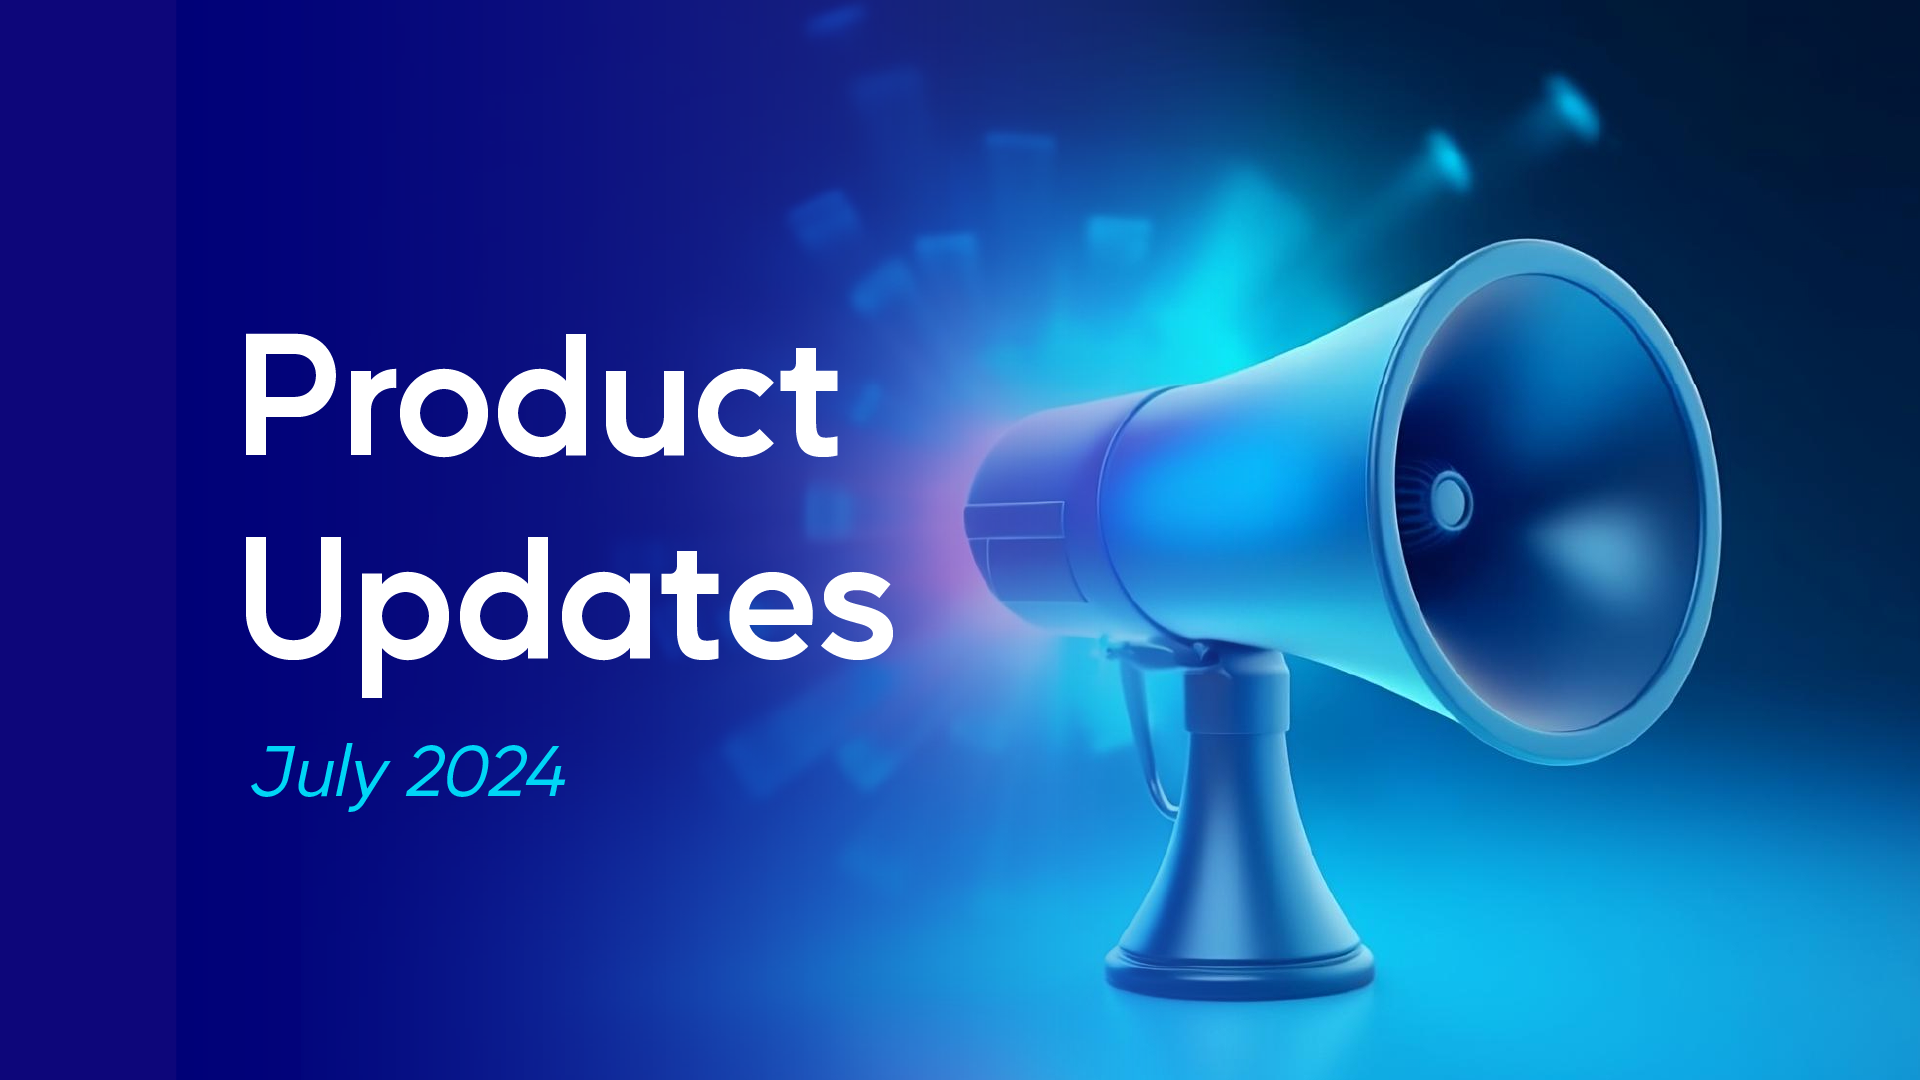 Megaphone with glowing light and text 'Product Updates July 2024' on a blue background